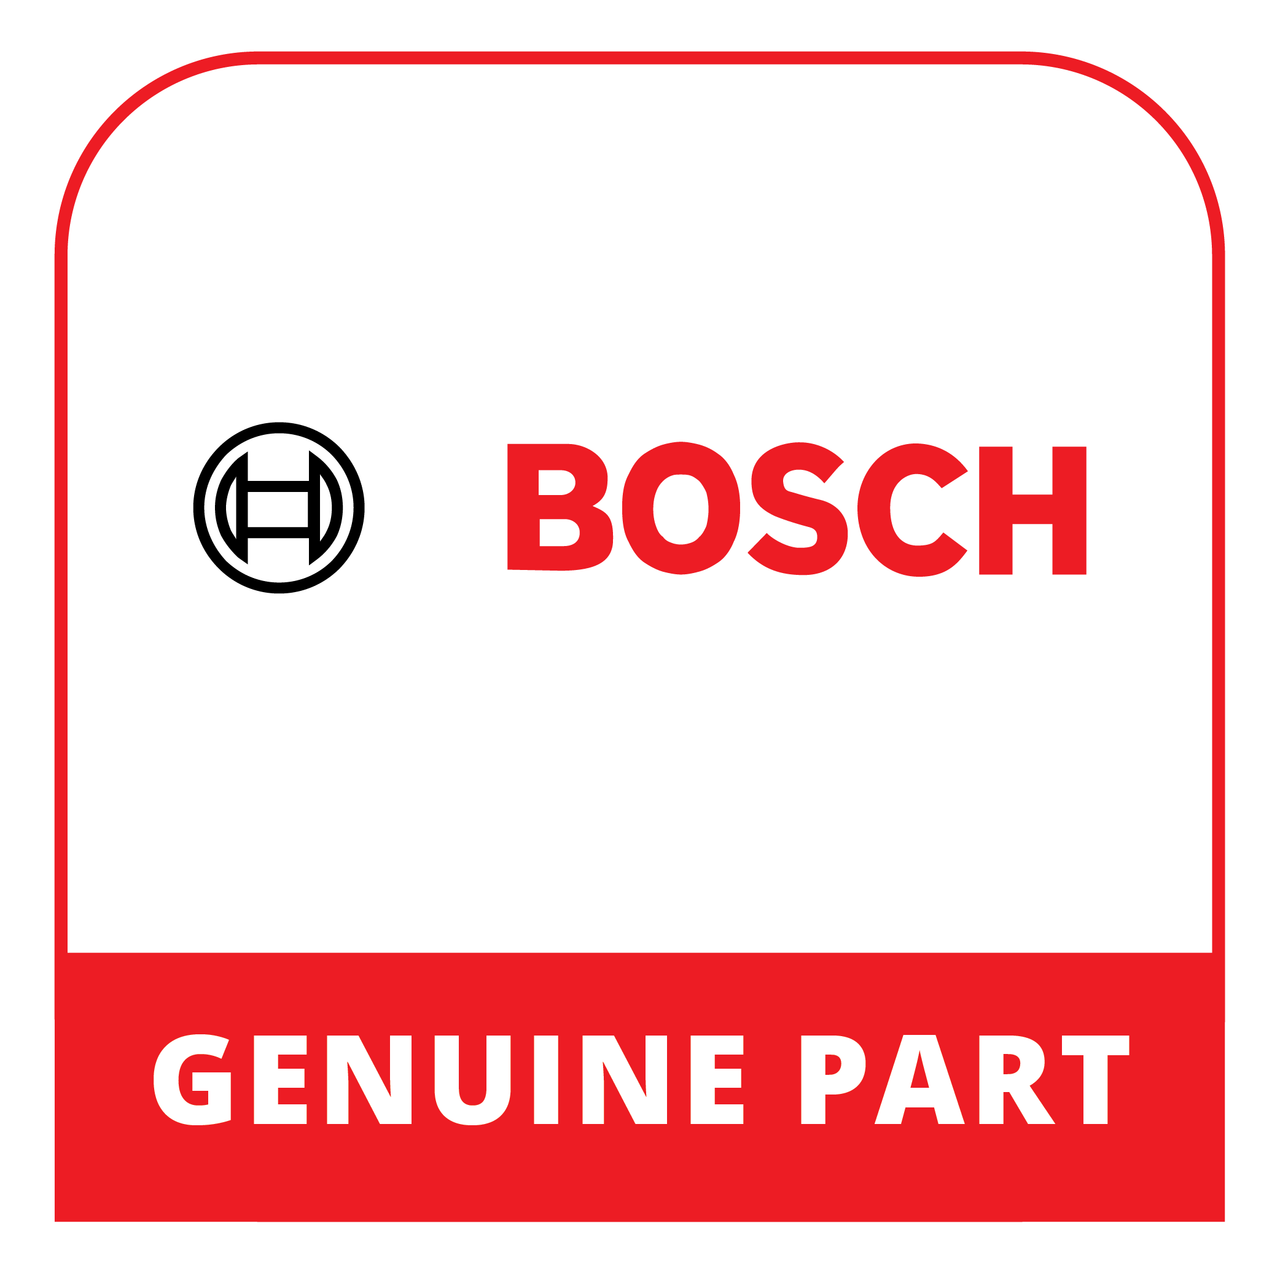 Bosch (Thermador) 18083815 - Instruction Manual - Genuine Bosch (Thermador) Part